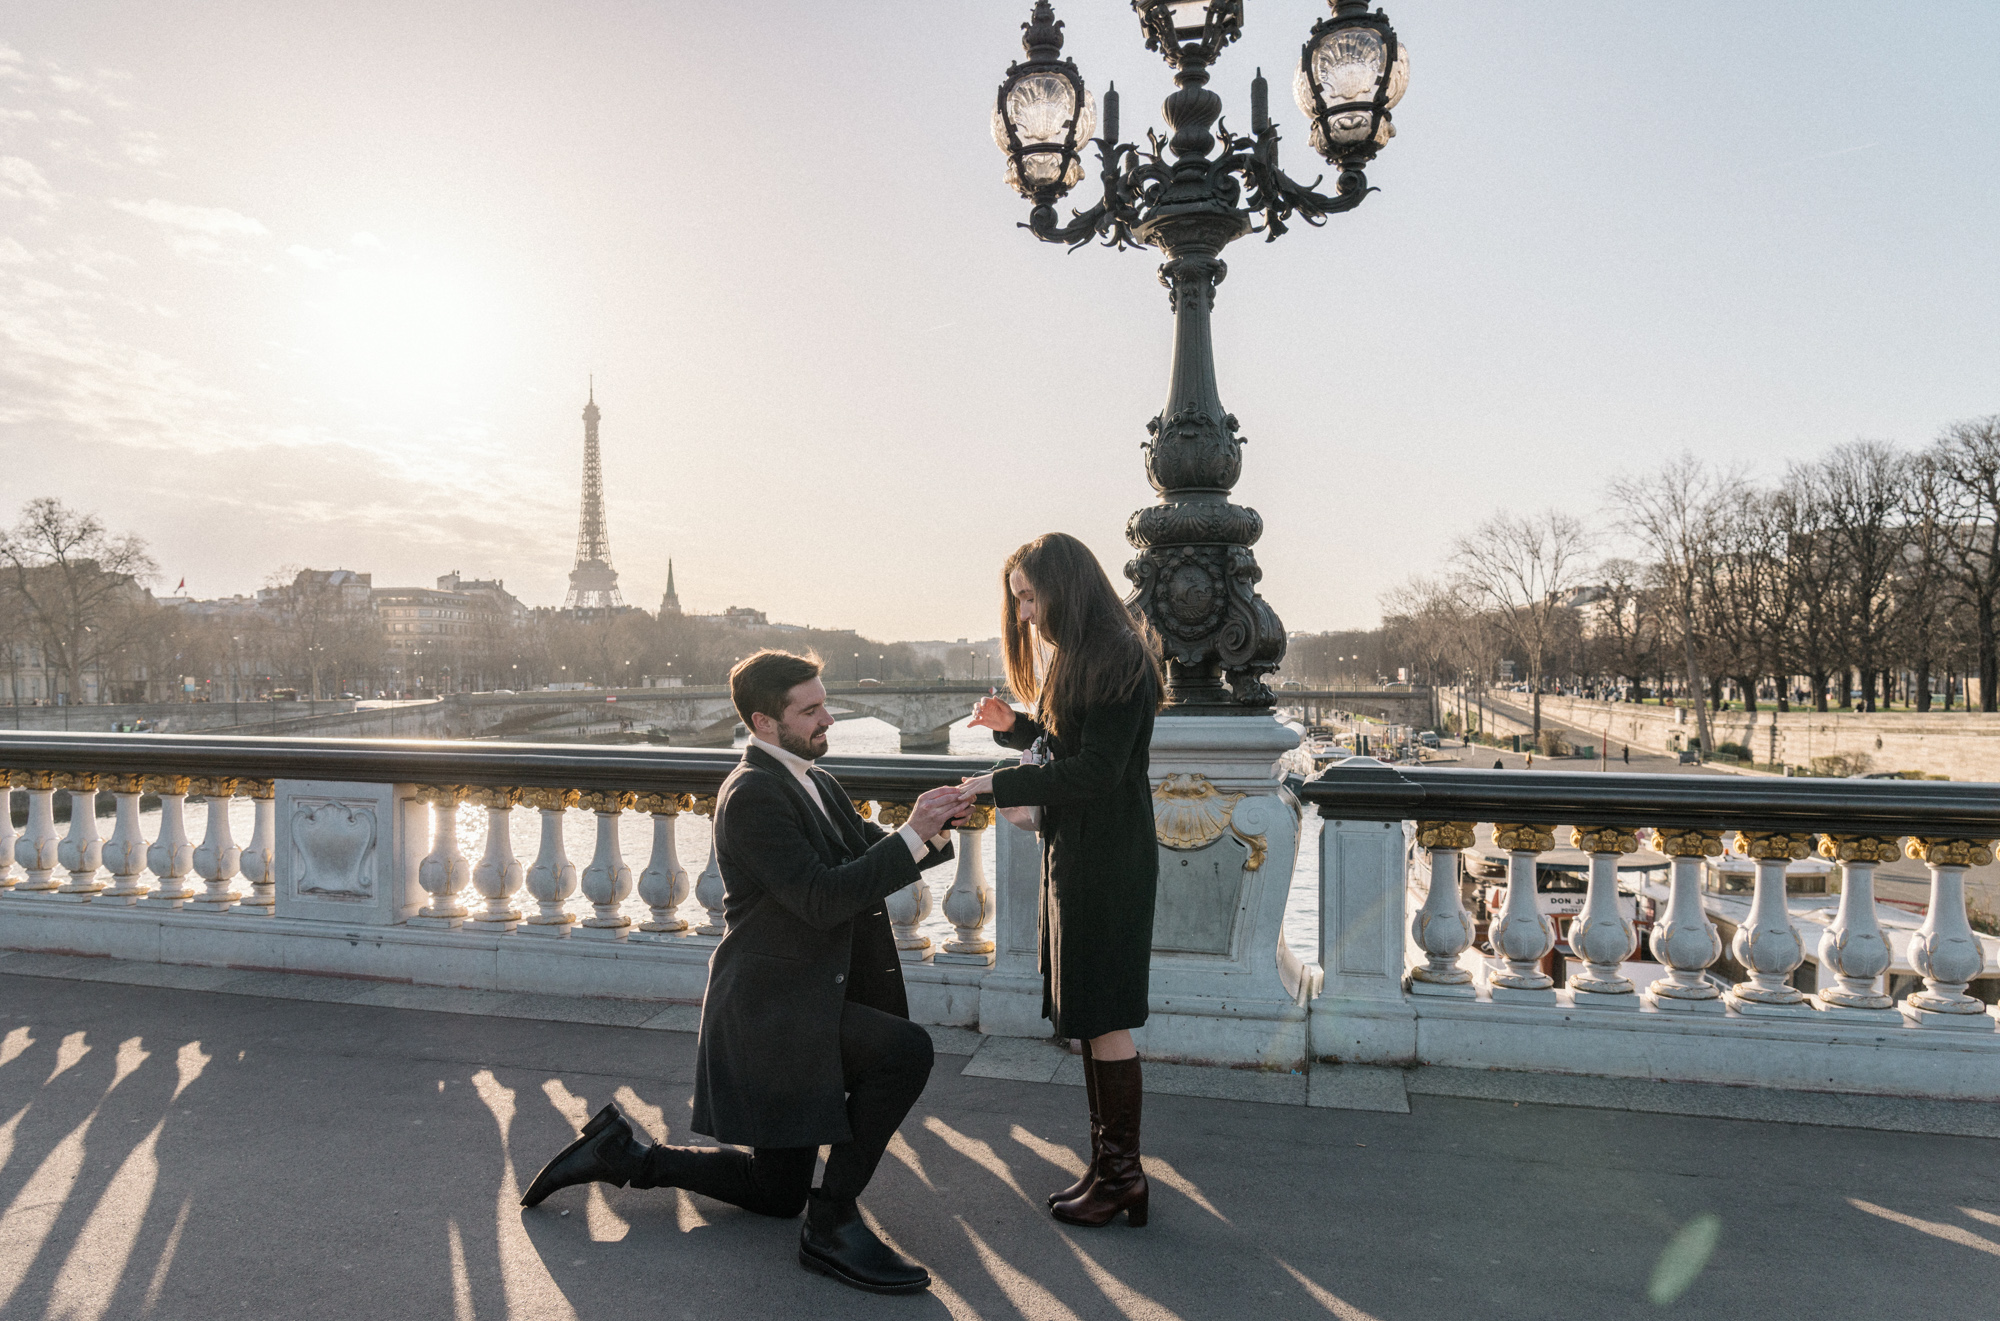 man places engagement ring on woman's hand on bridge in paris